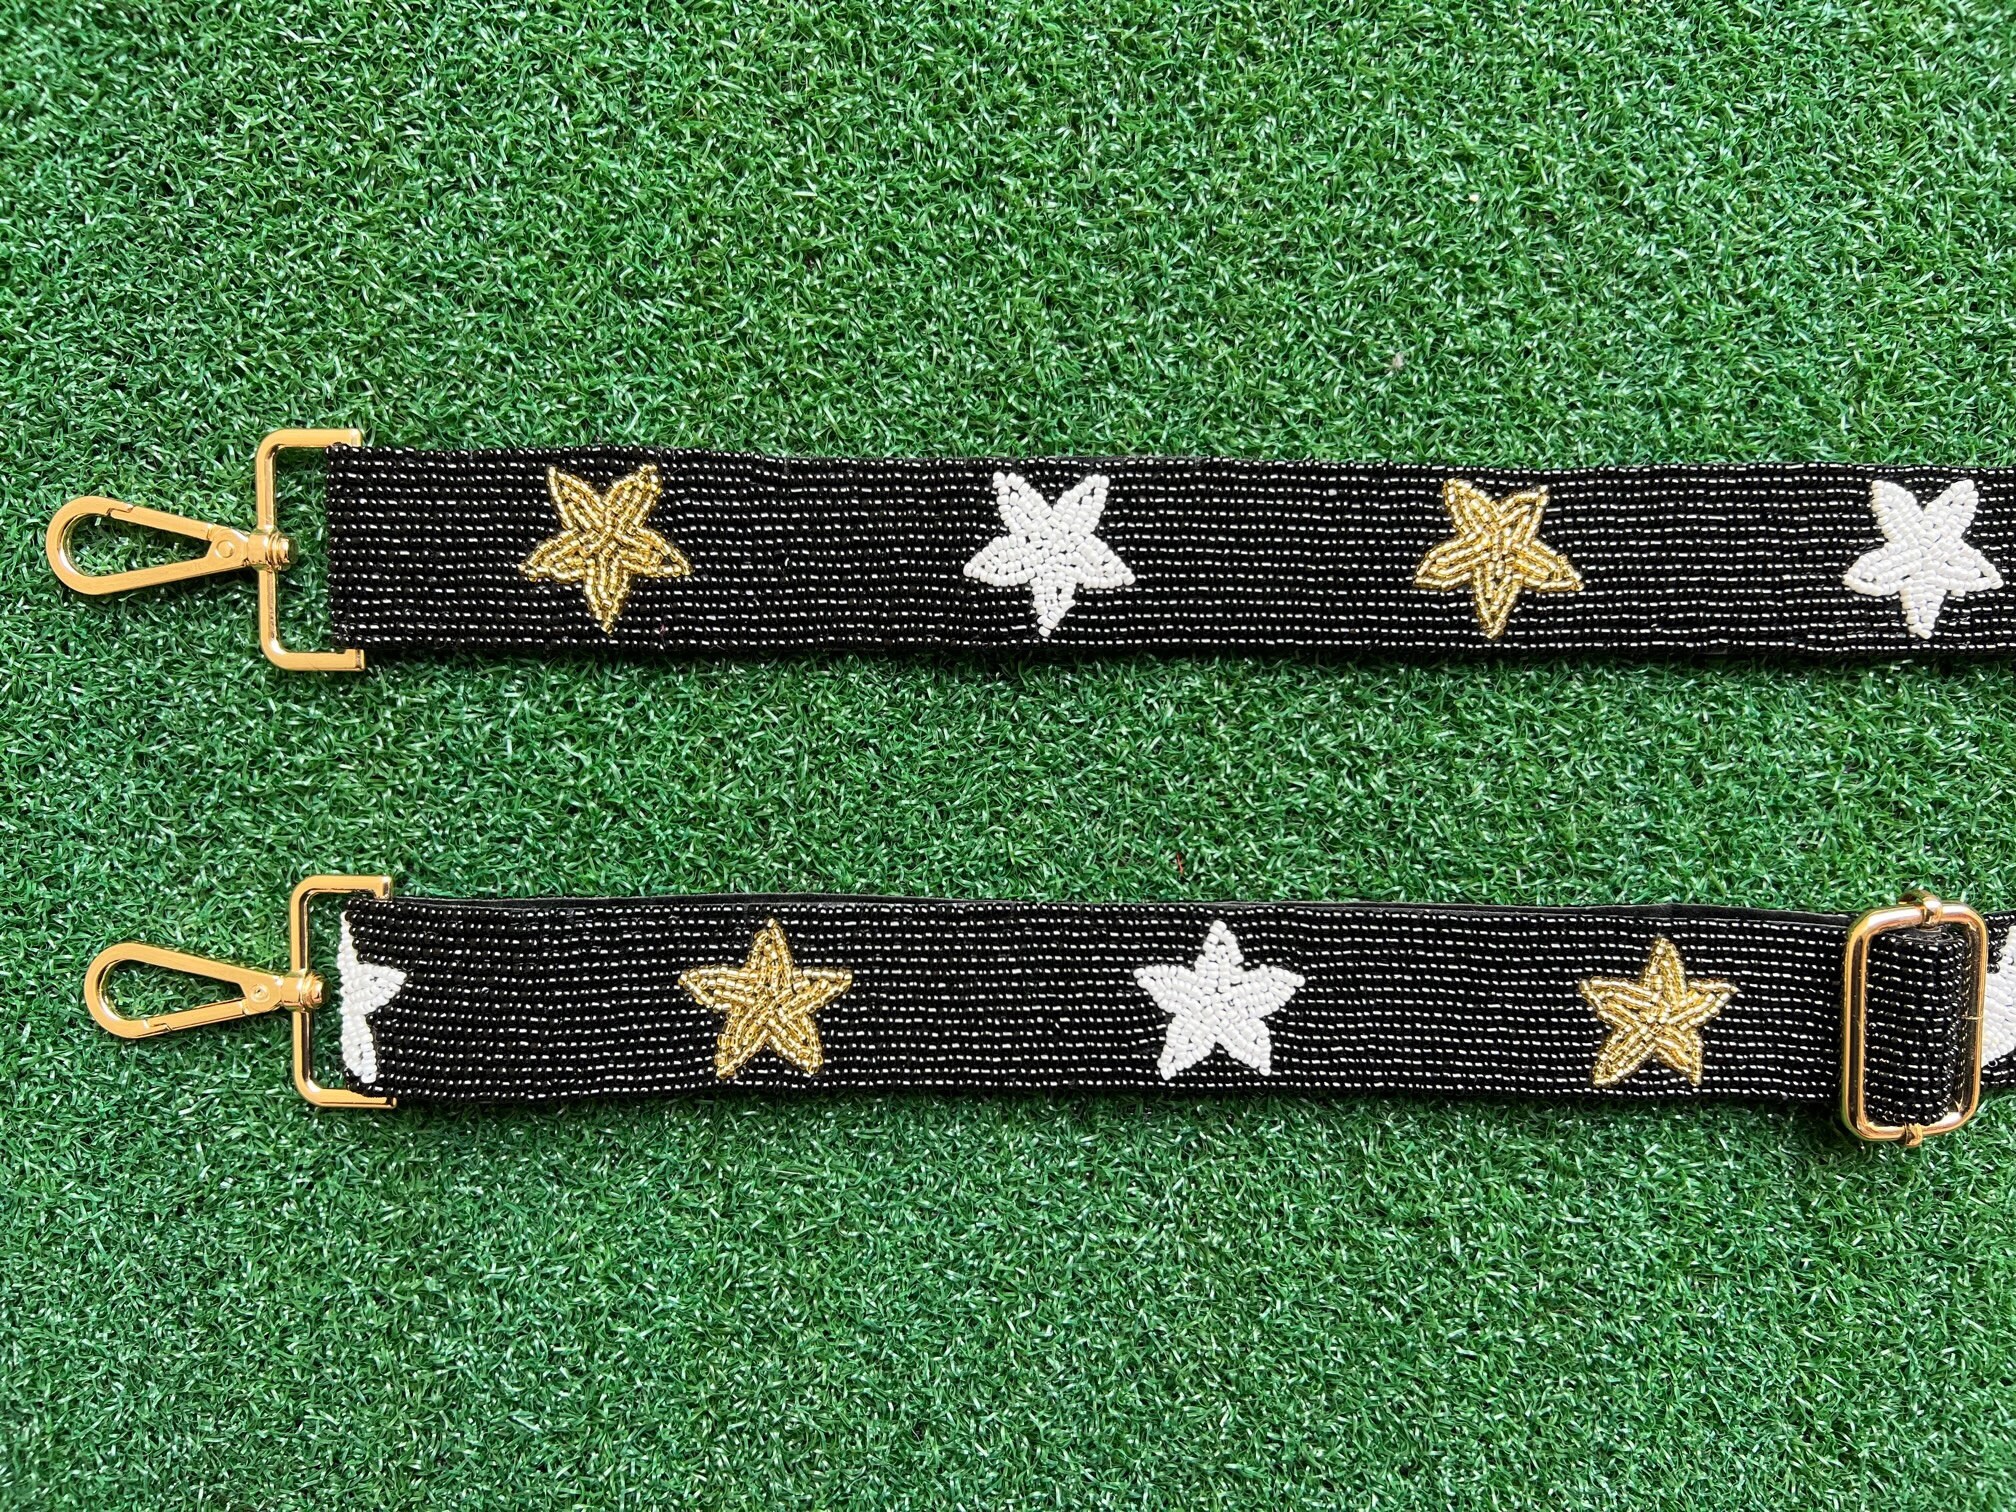 Black and Gold Star Beaded Purse Strap